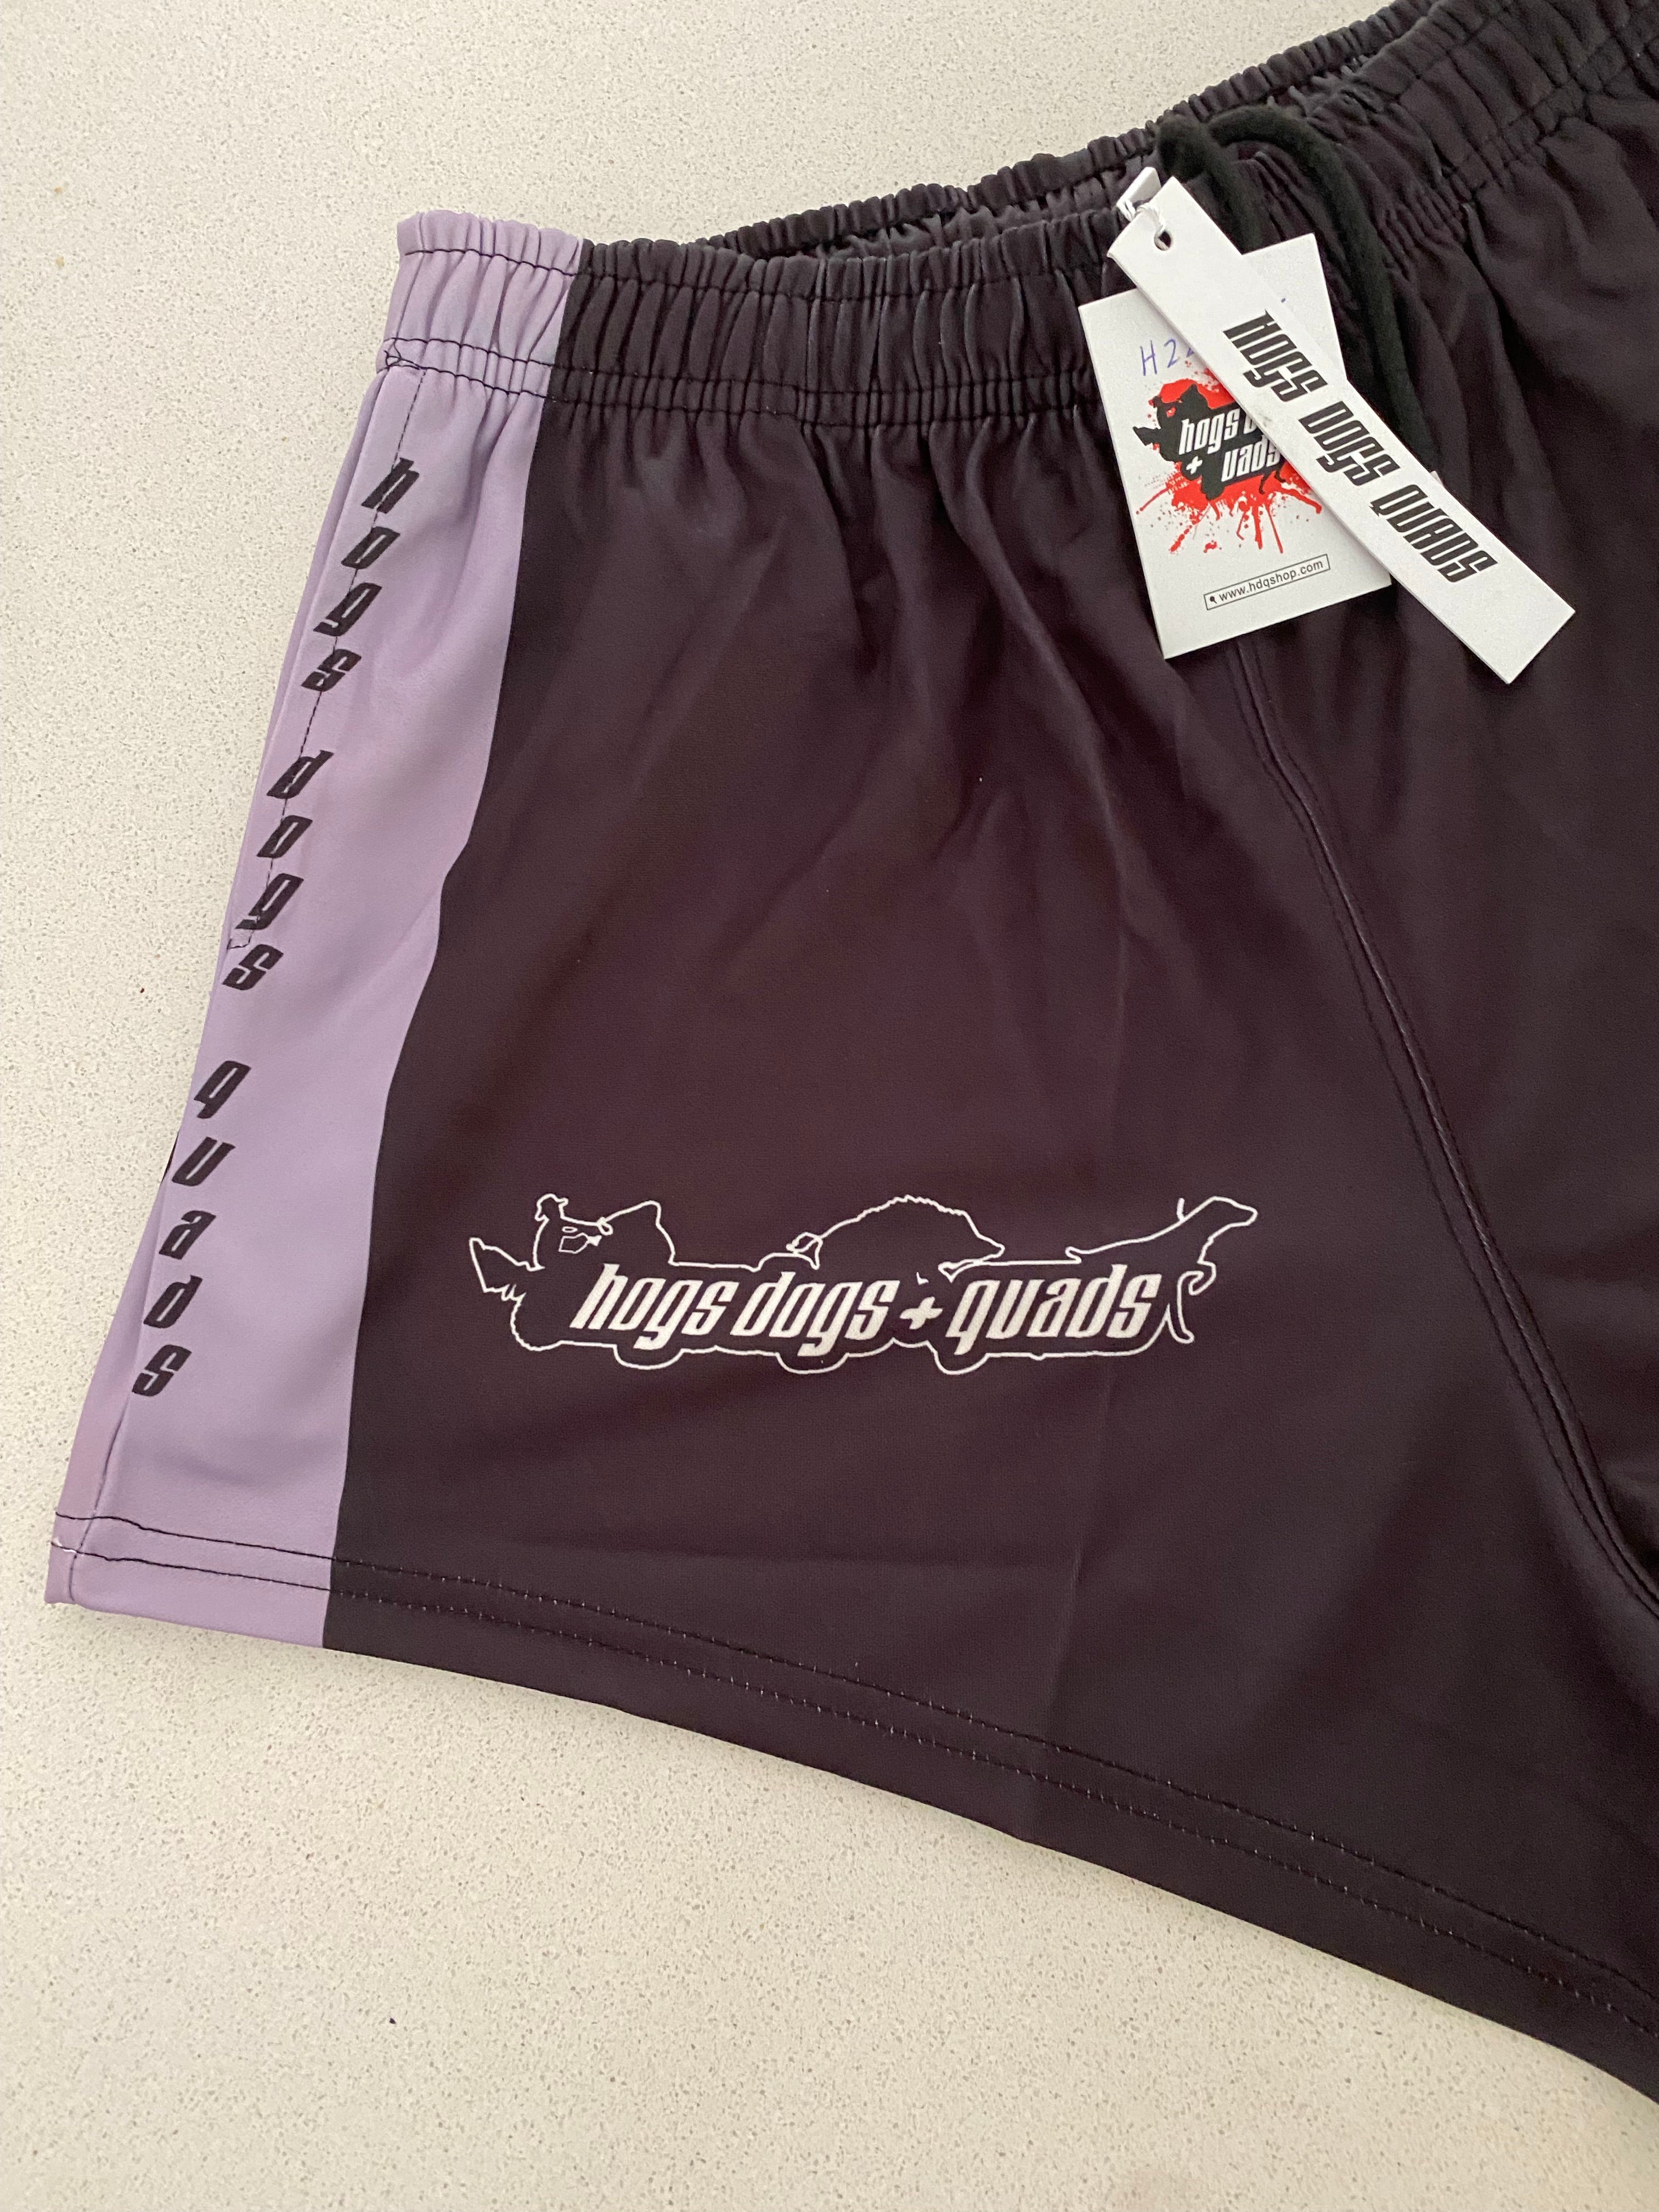 🔥🔥 NEW HUNTING🔥🔥 Footy Shorts with ZIP UP pockets! - Hogs Dogs Quads Shop